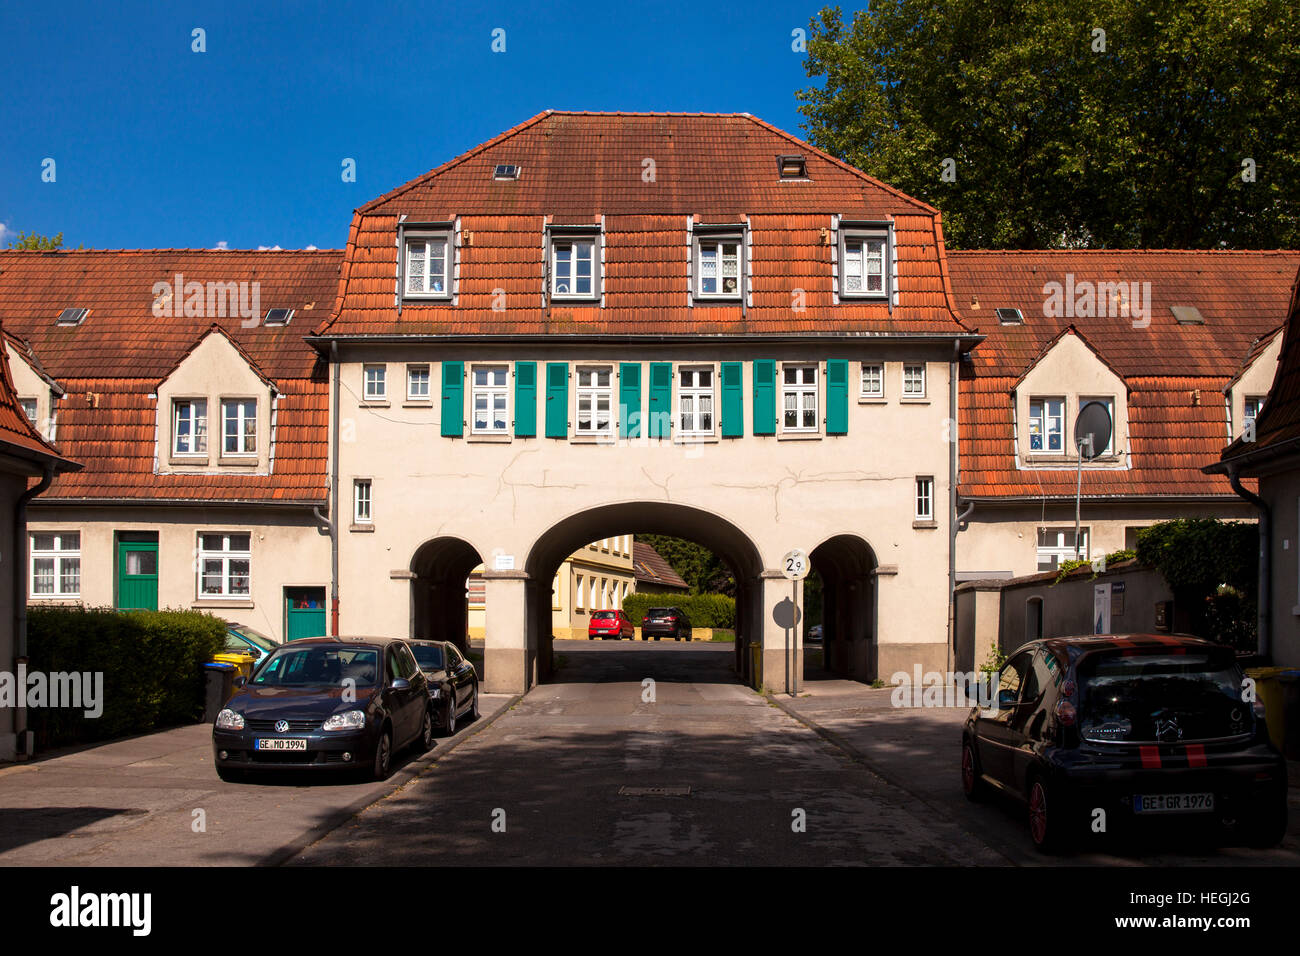 Germany, Ruhr area, Gelsenkirchen, the colony Schuengelberg, former residential area for miners. Stock Photo